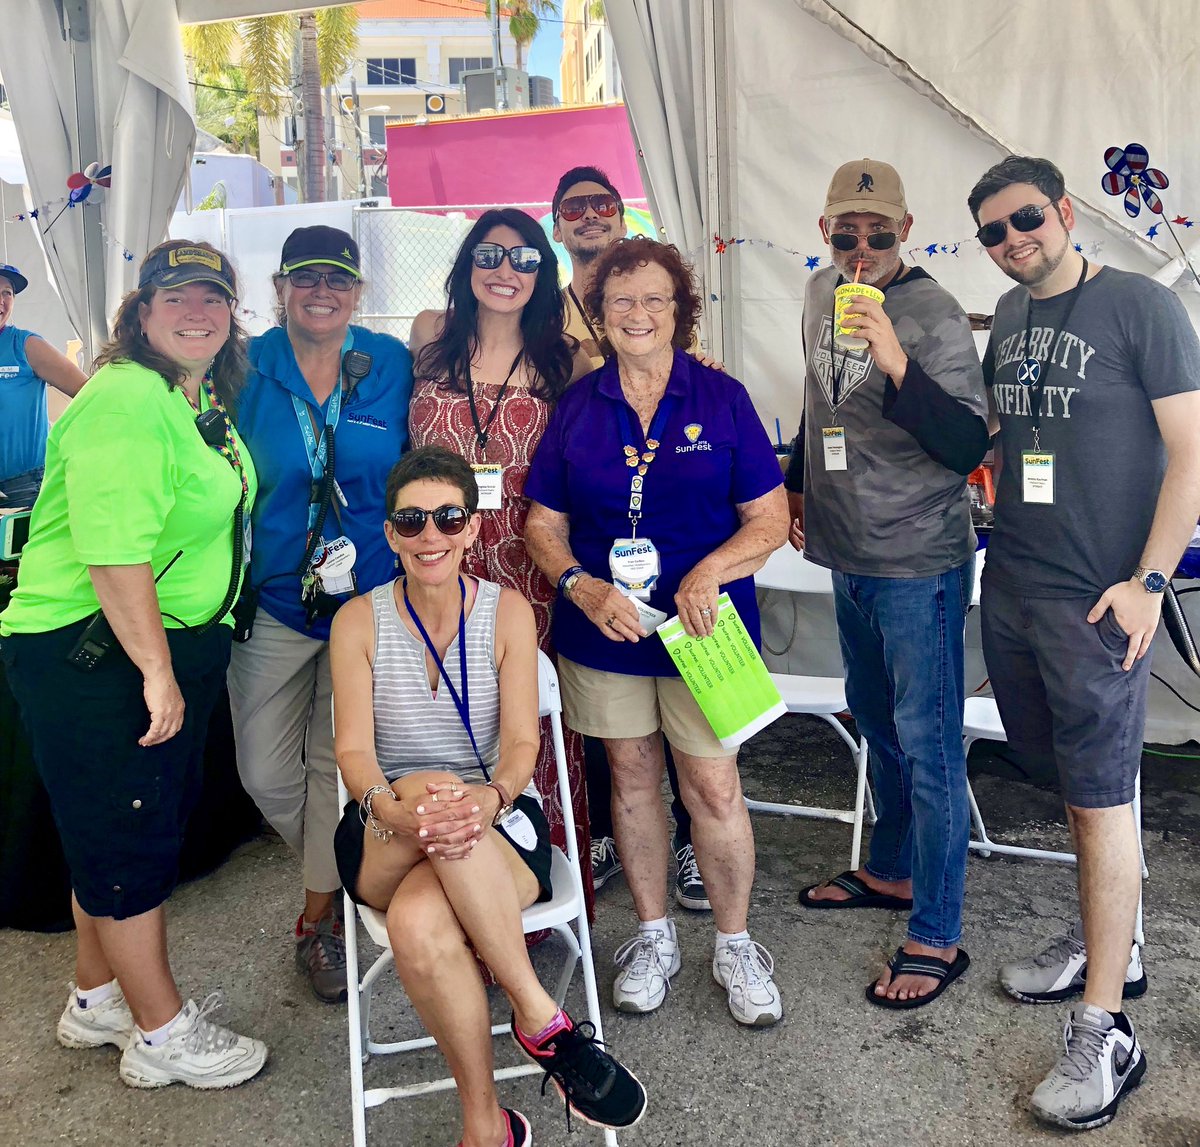 #KVJ #VolunteerArmy in full force at #SunFest2019! Great music and great fun!